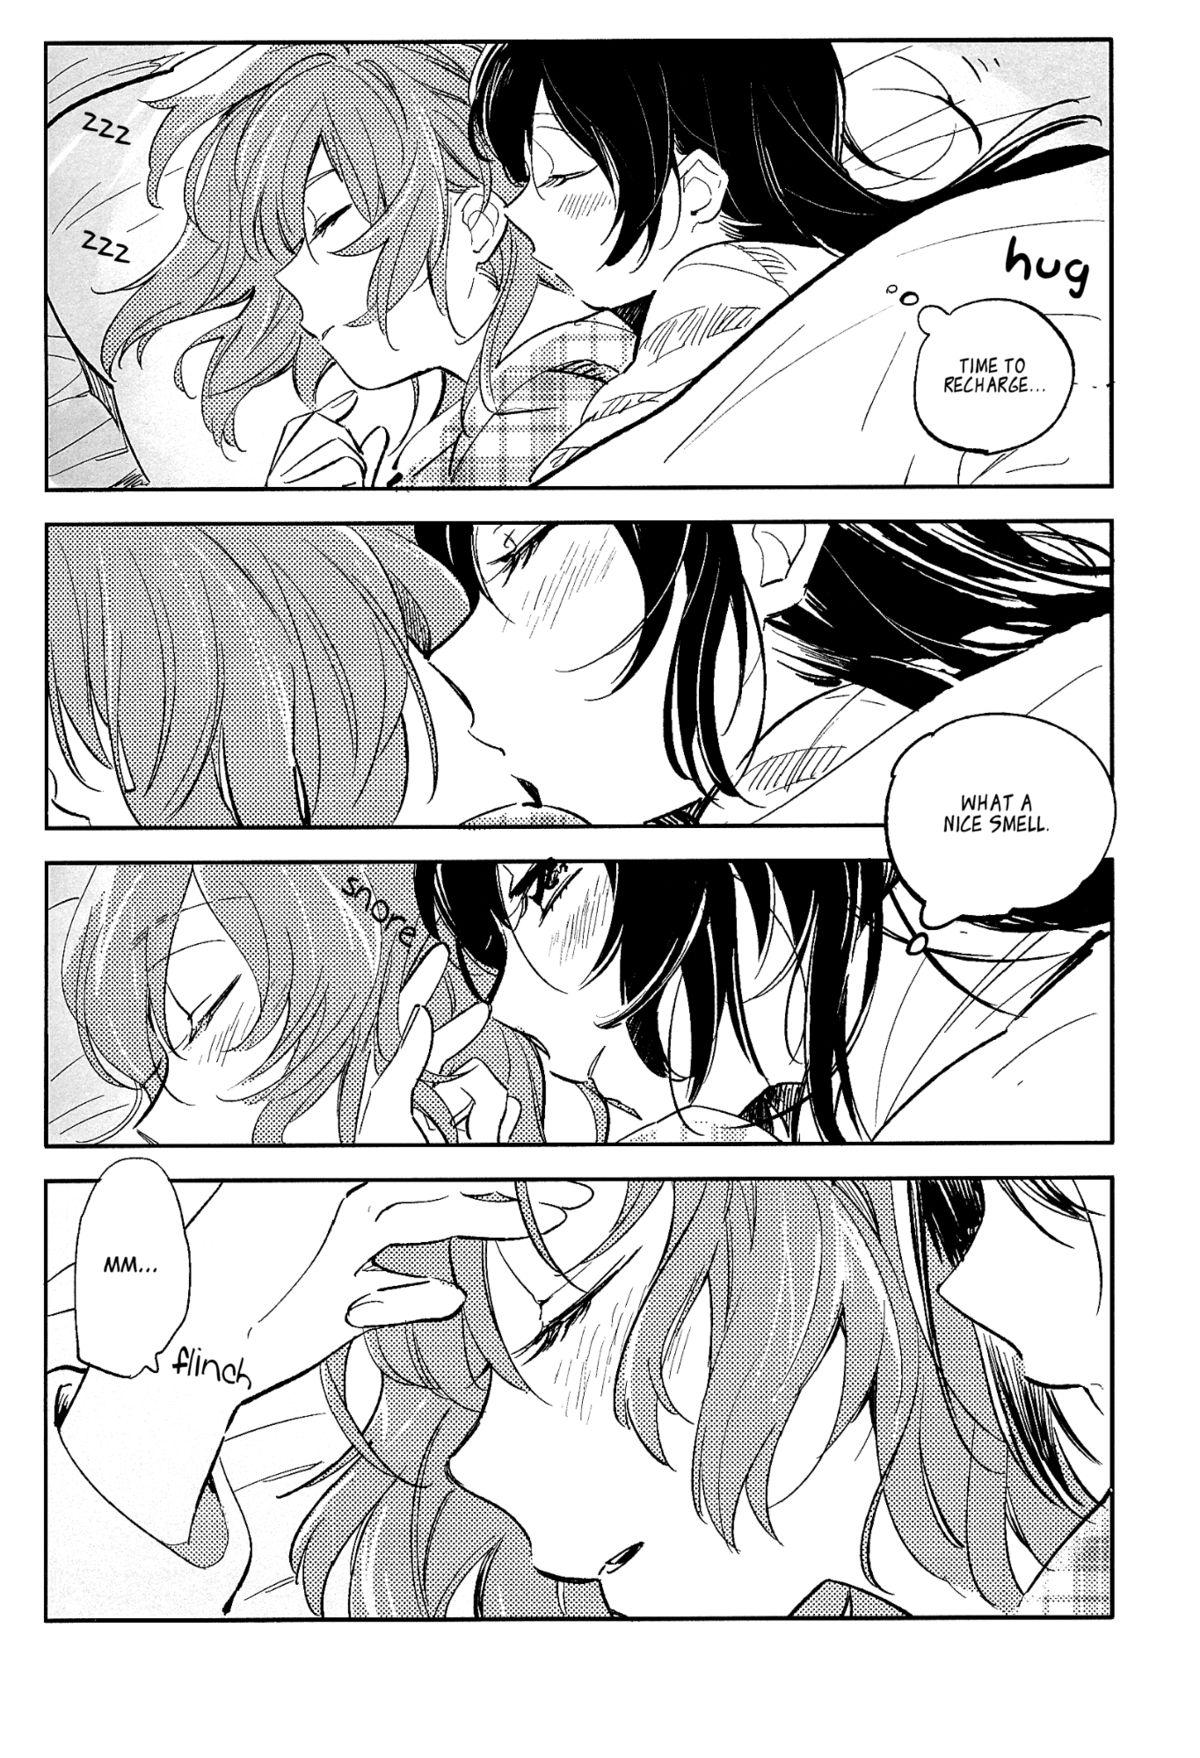 Eurosex Koibito no Jikan | Time for Lovers - Love live Great Fuck - Page 6